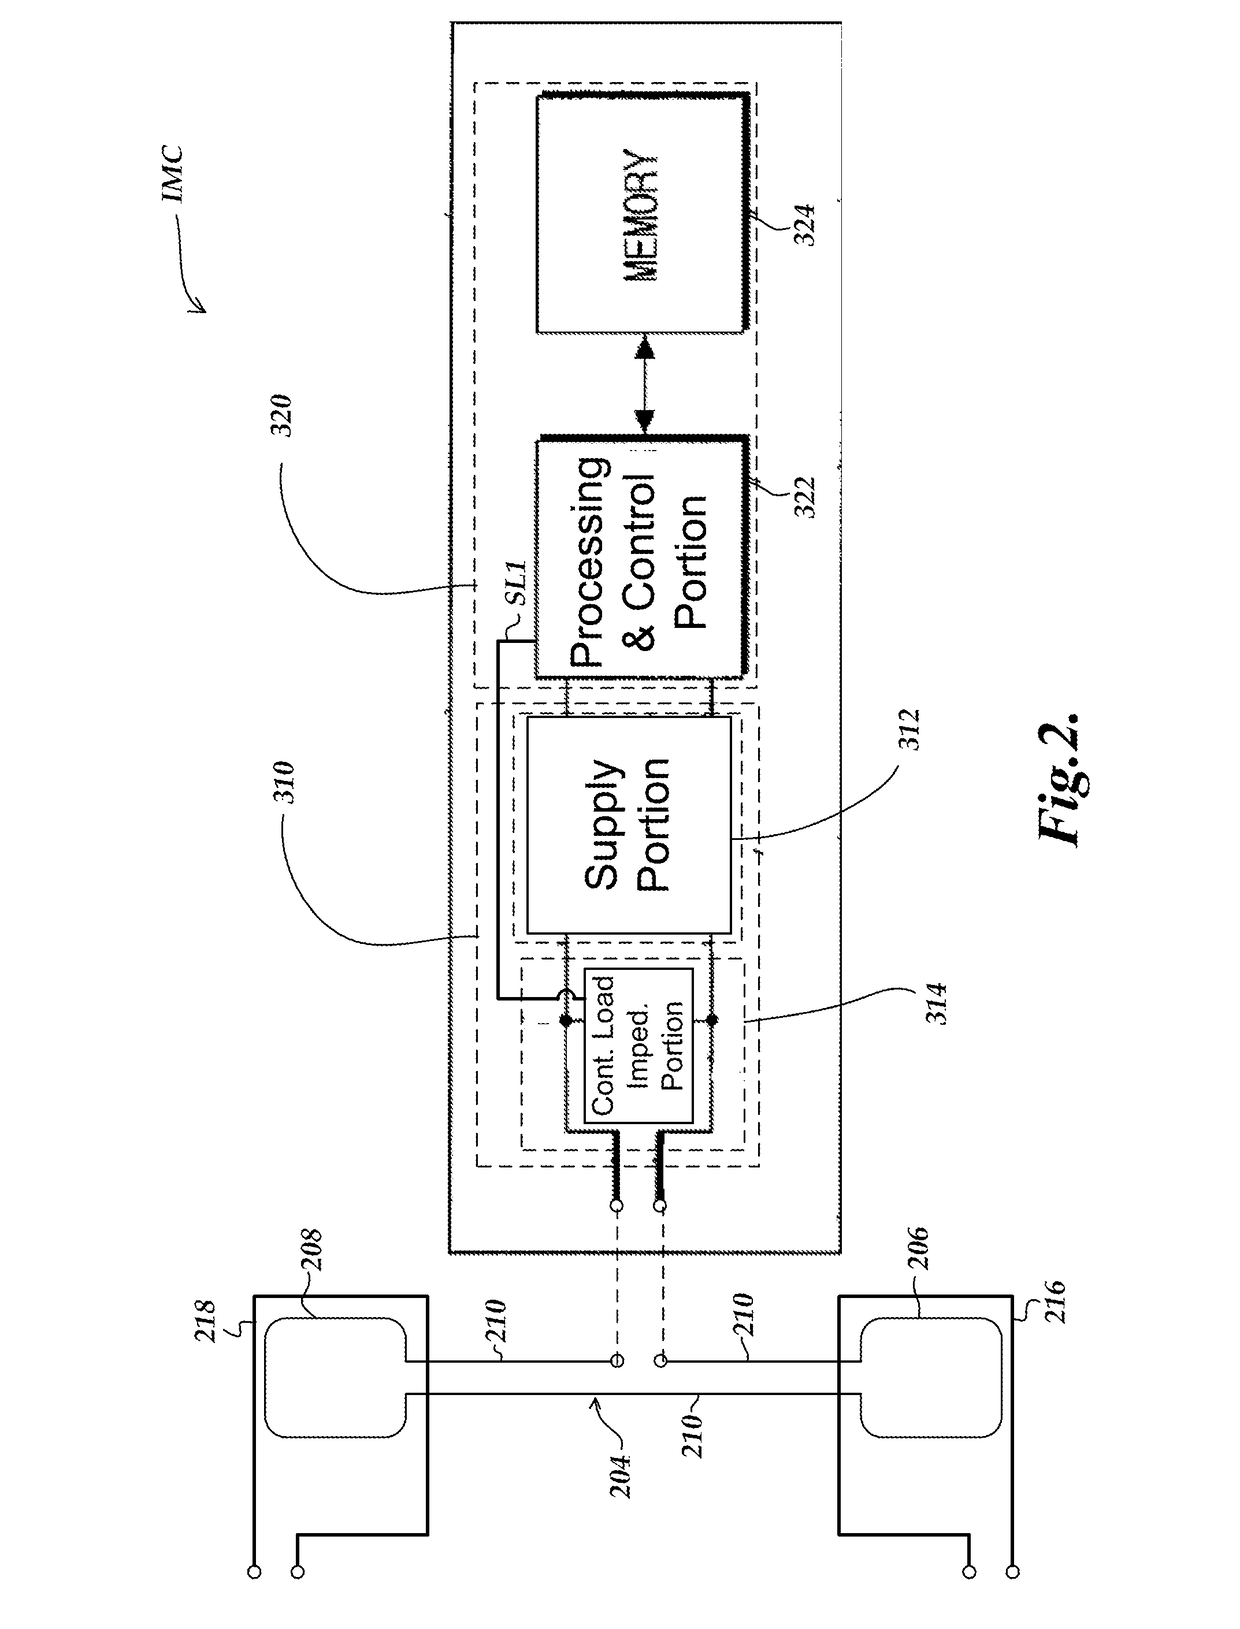 Absolute encoder scale configuration with unique coded impedance modulations